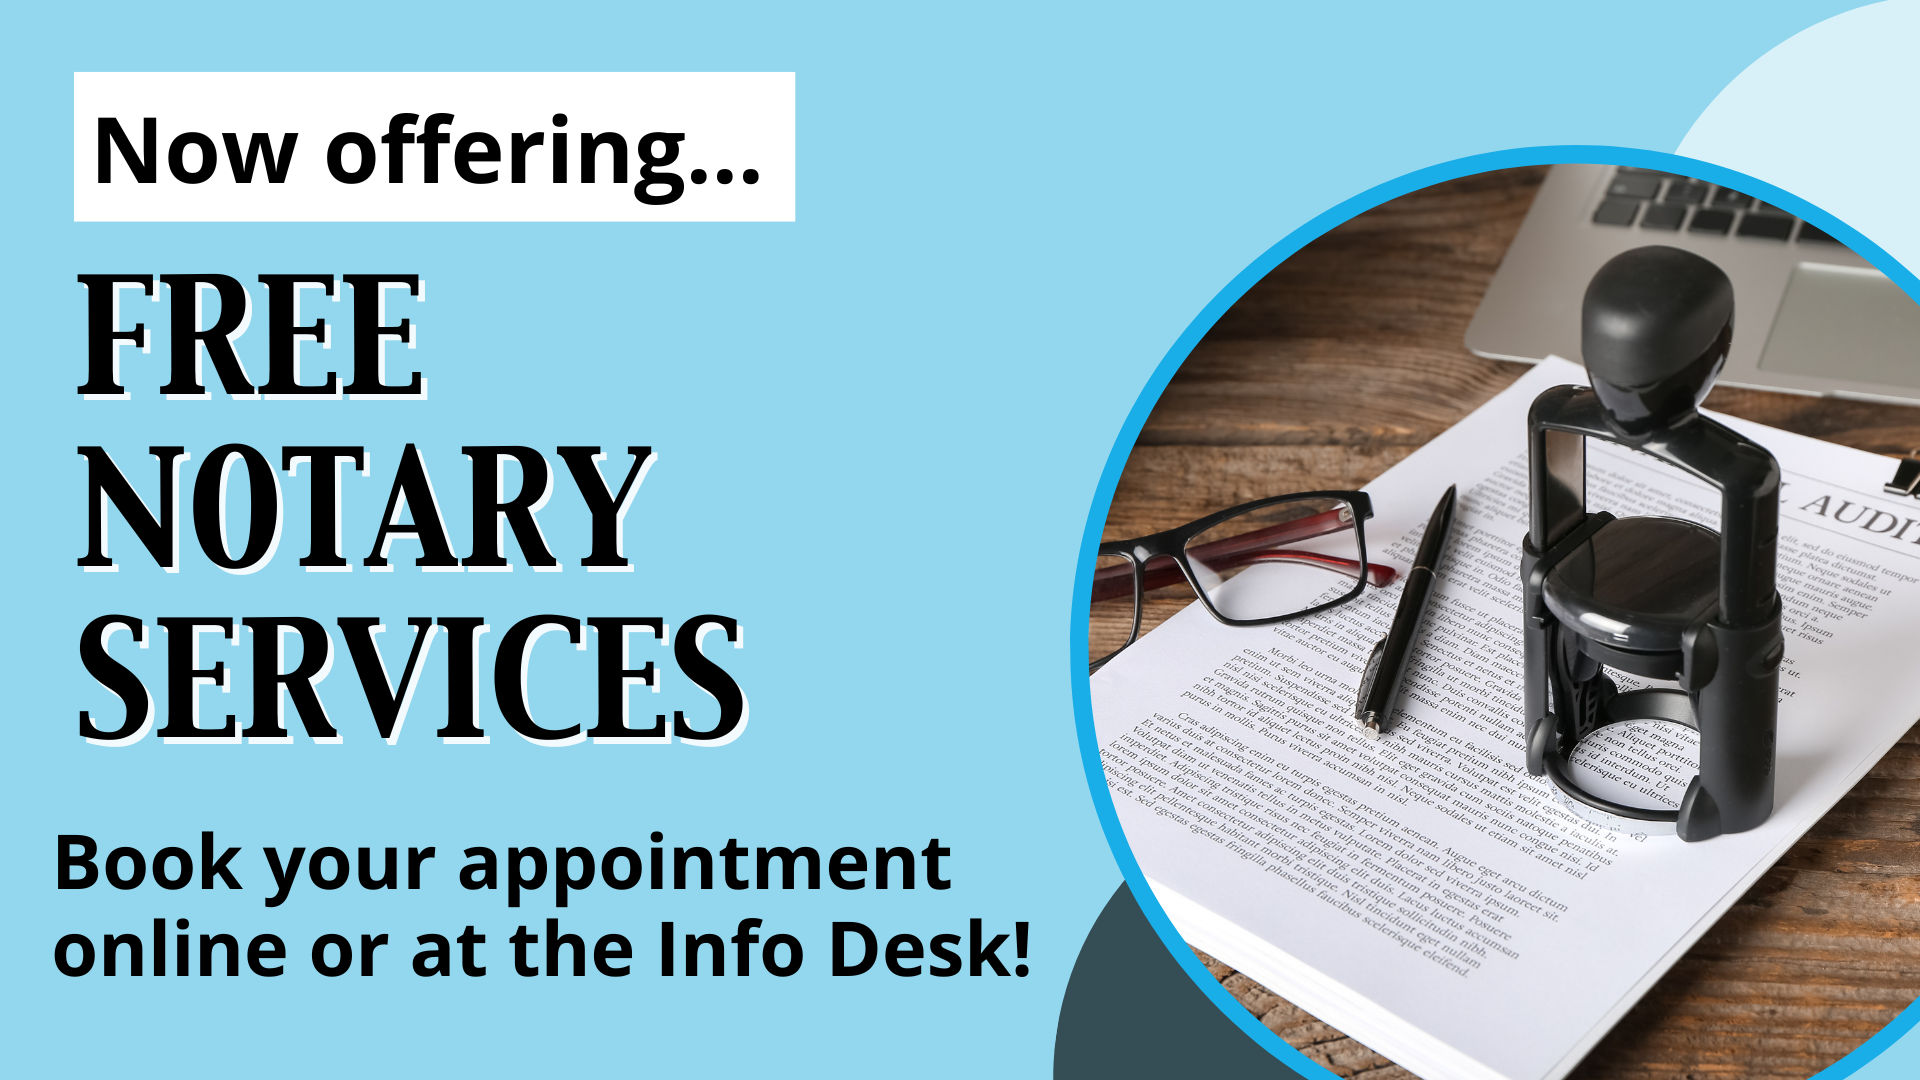 Now offering Free Notary Services Book your appointment online or at the Info Desk